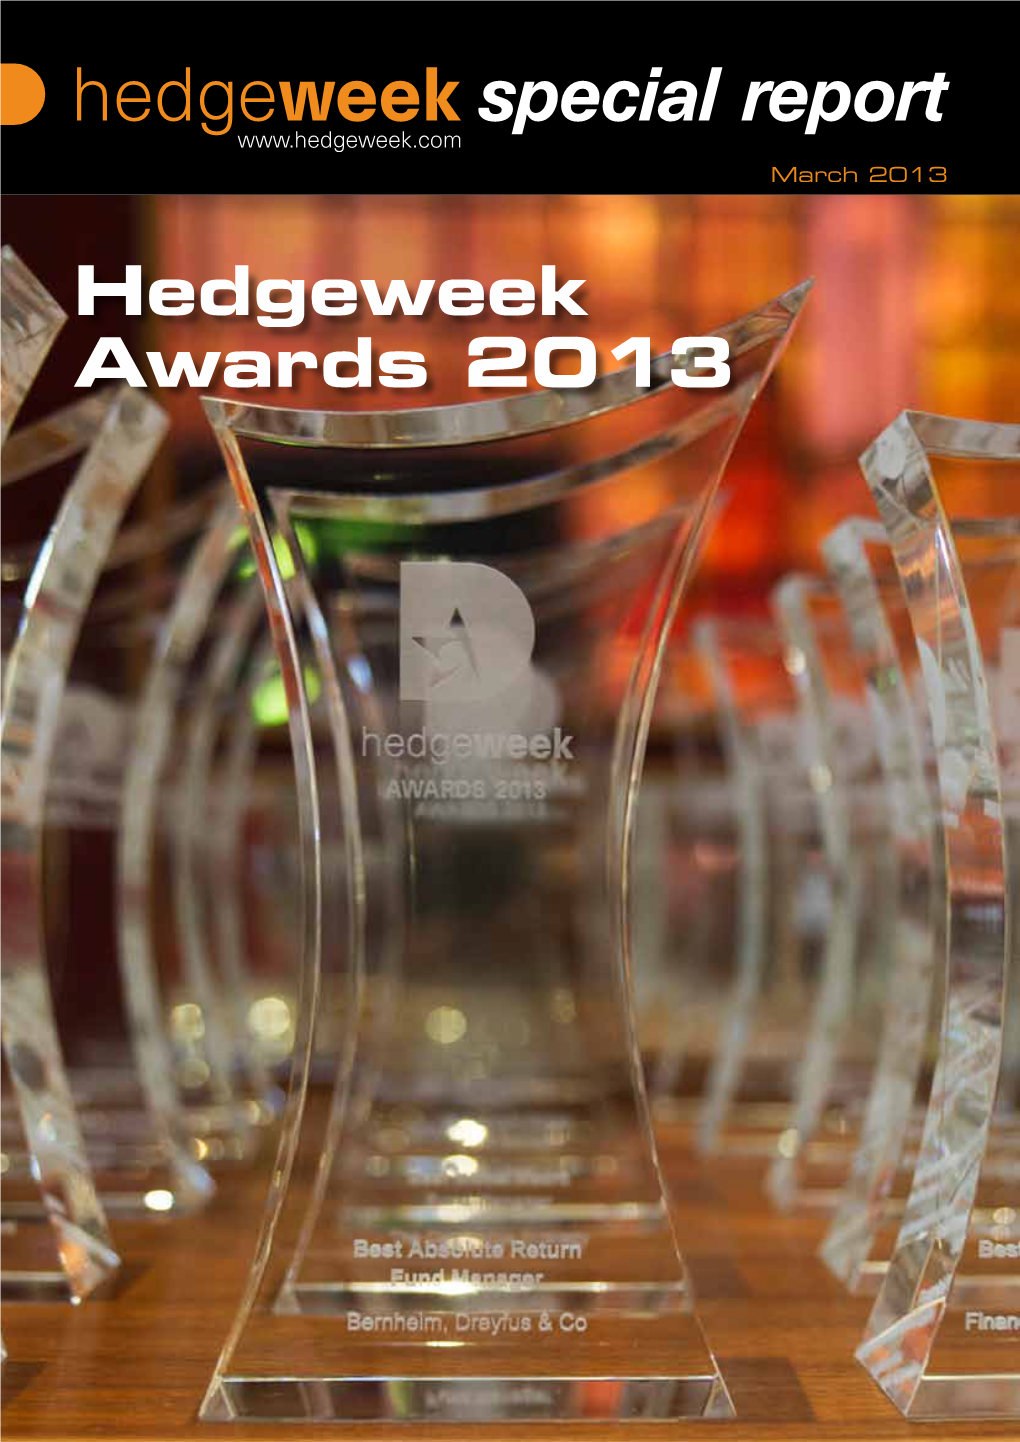 Hedgeweek Awards 2013 LEADING the WAY UNRIVALLED in CHOICE, QUALITY and EXPERIENCE